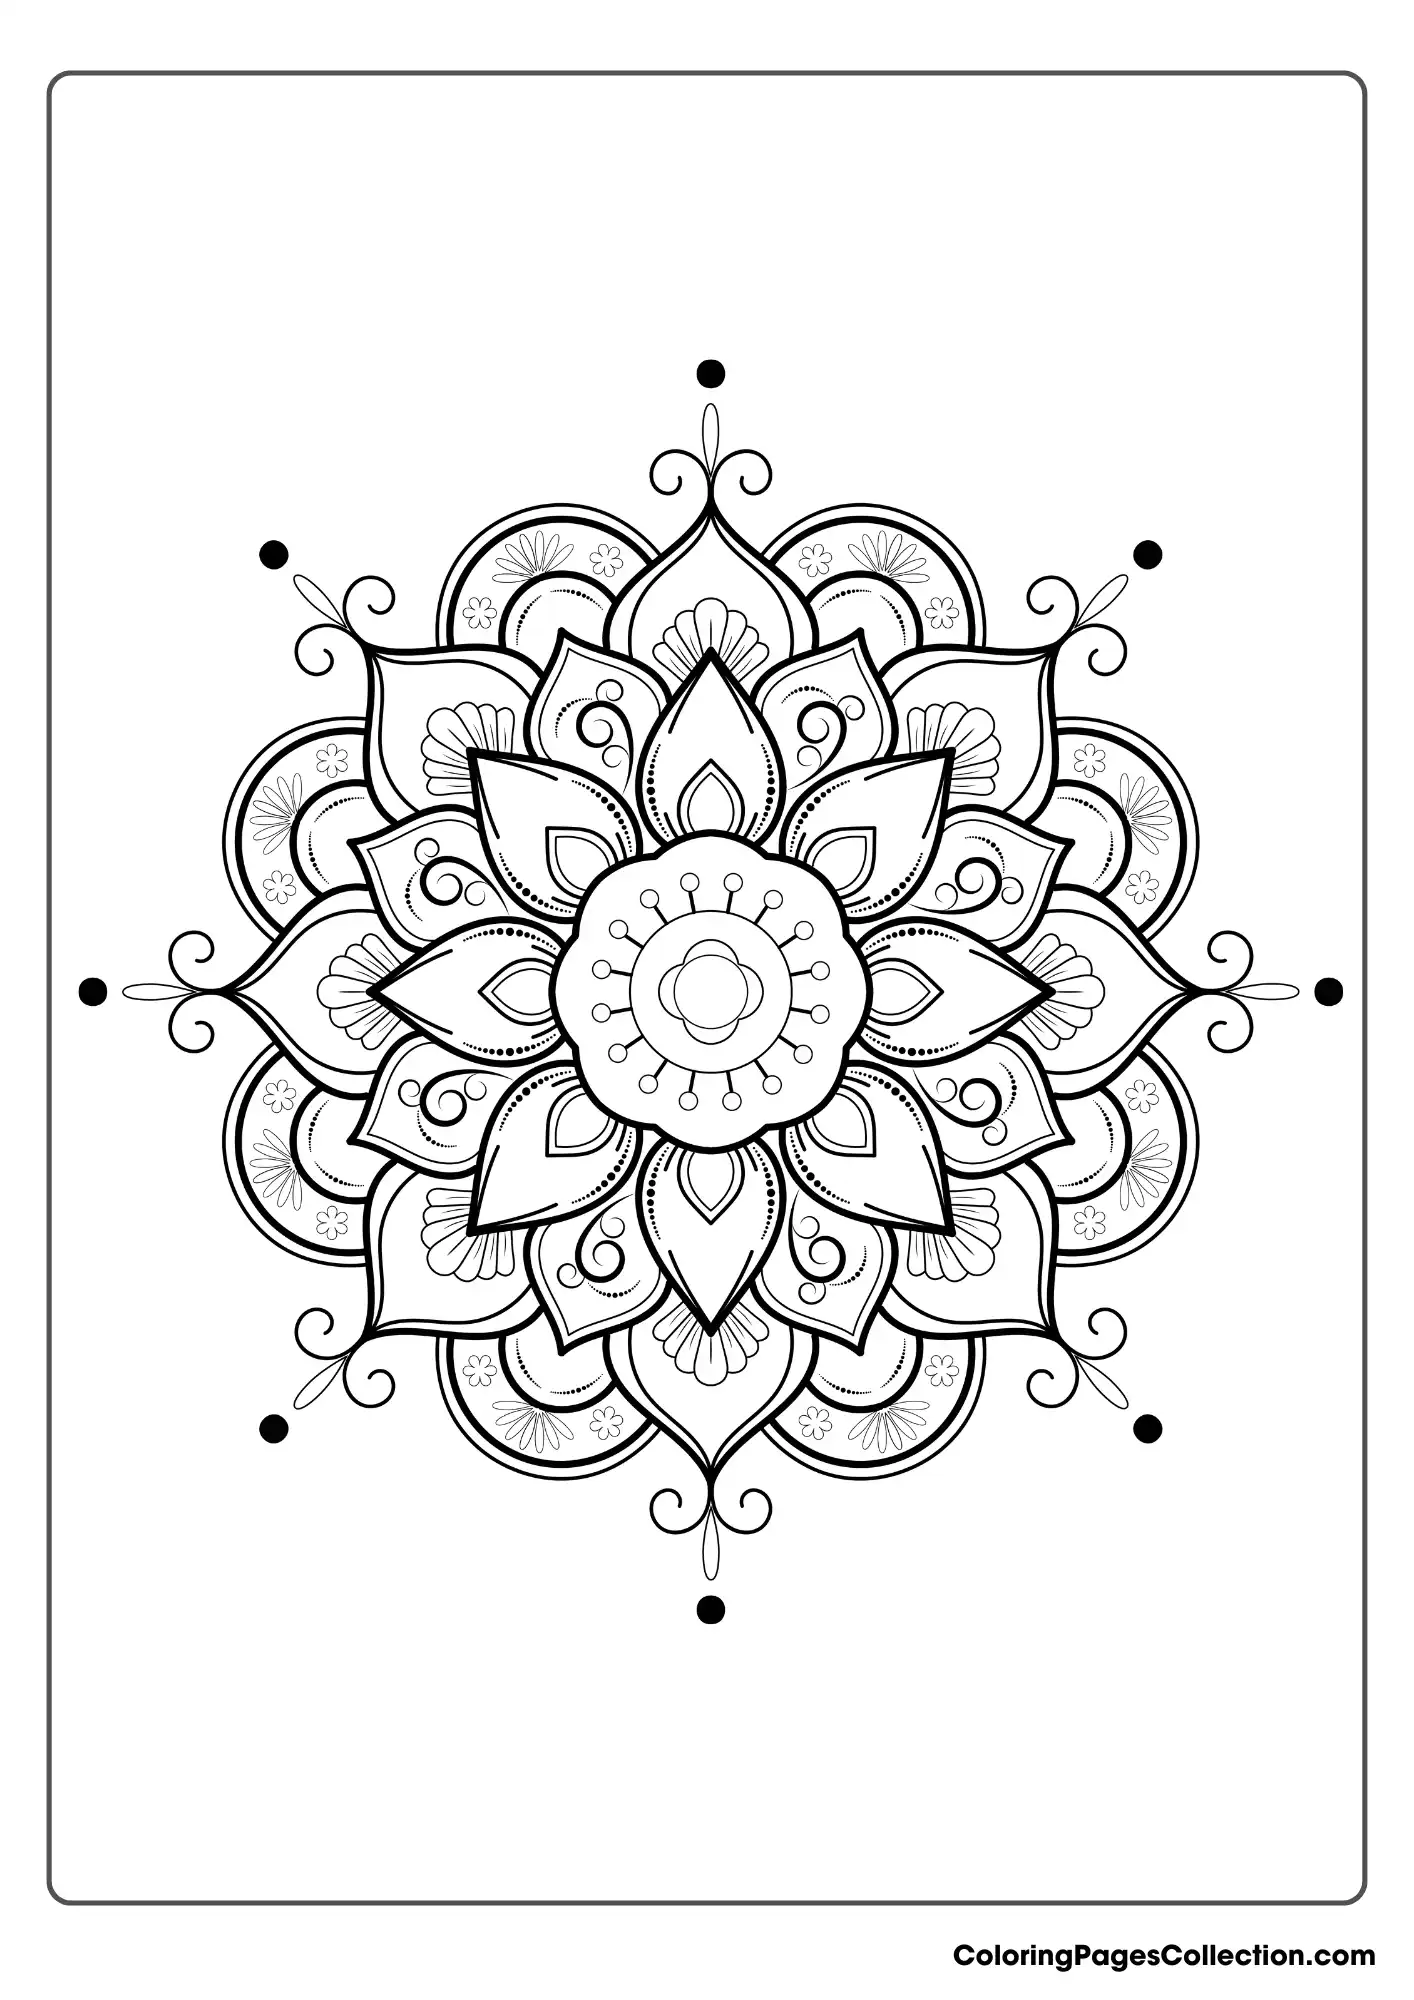 Coloring pages for teens, Design Art to Color